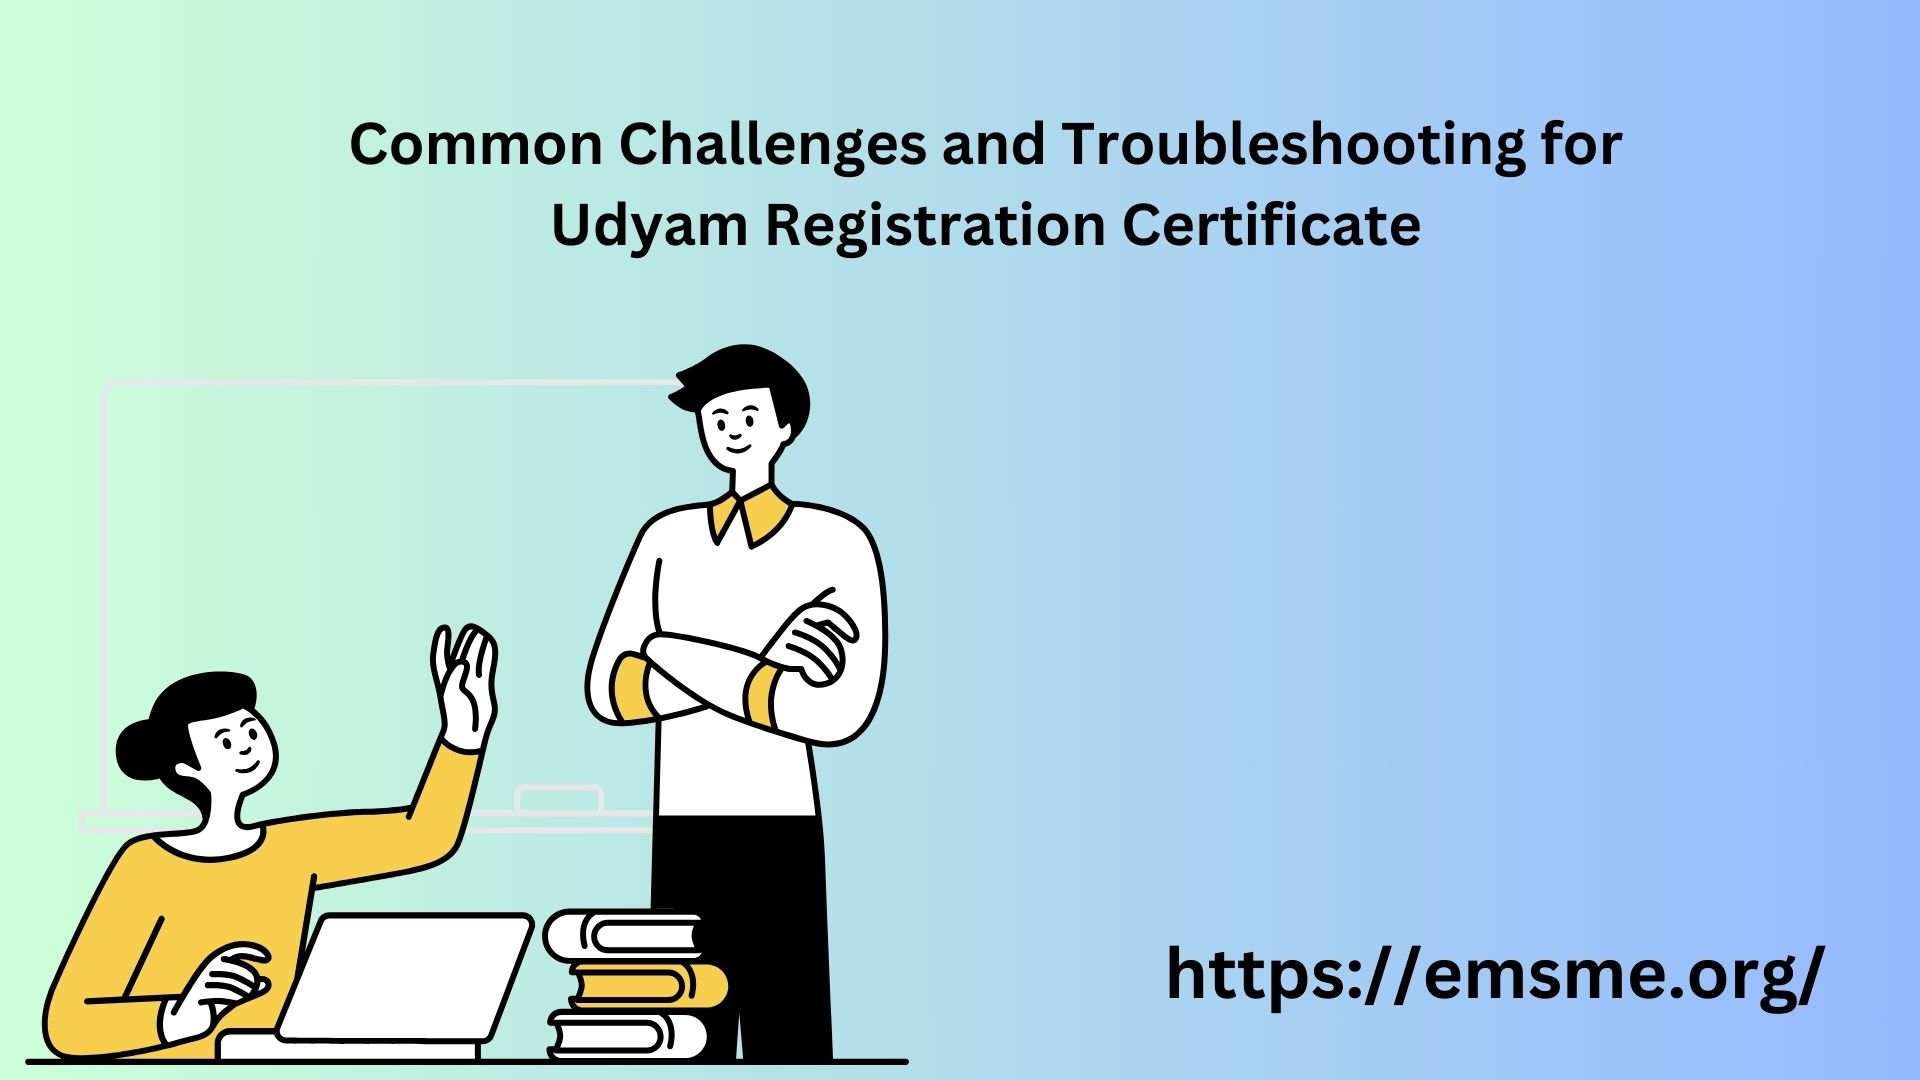 Troubleshooting for Udyam Registration Certificate